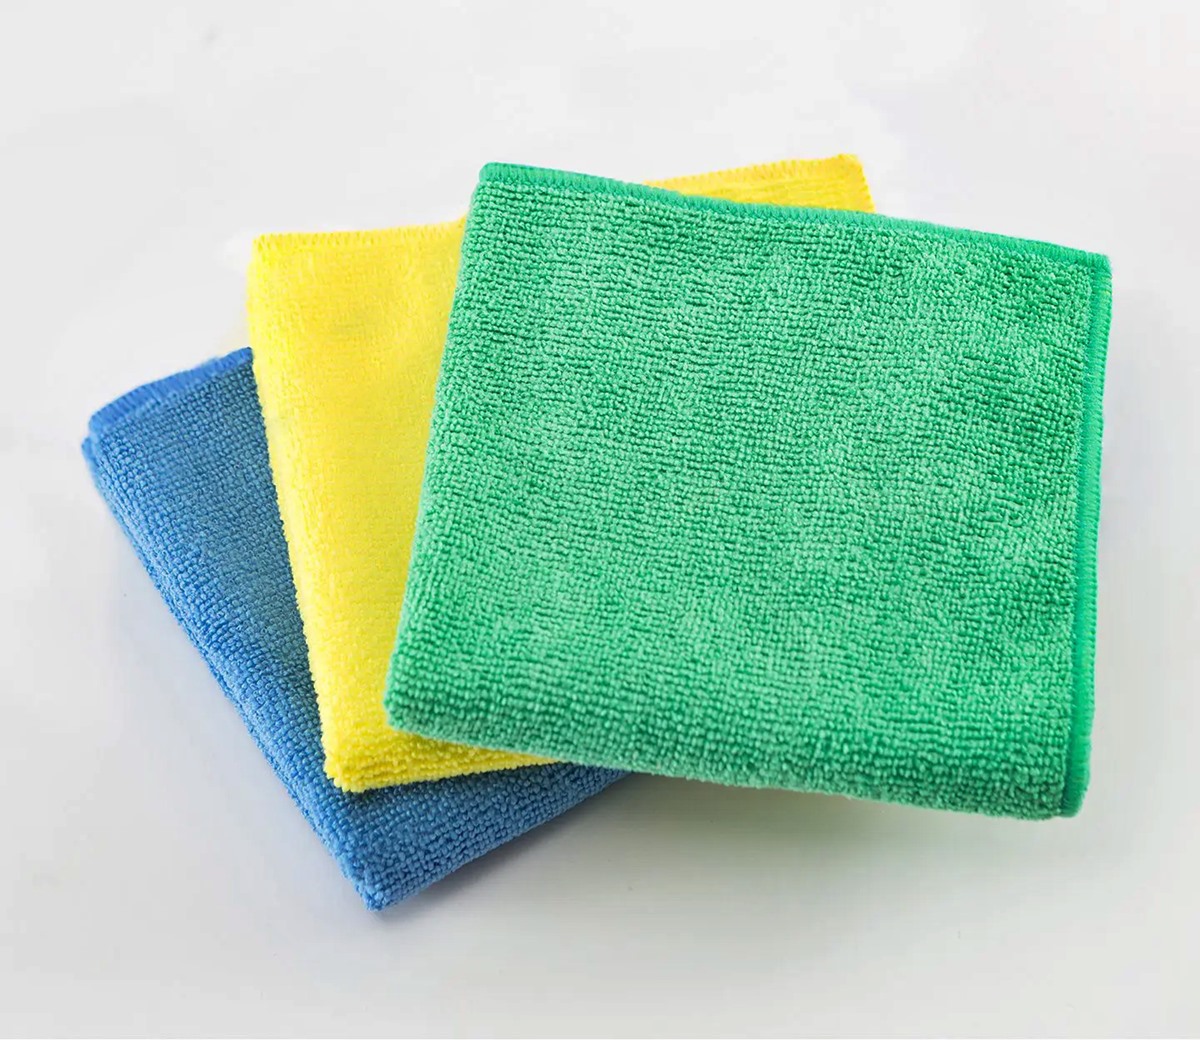 Aidea Microfiber Cleaning Cloths, 8Pk-Multi-Purpose Cleaning Cloth